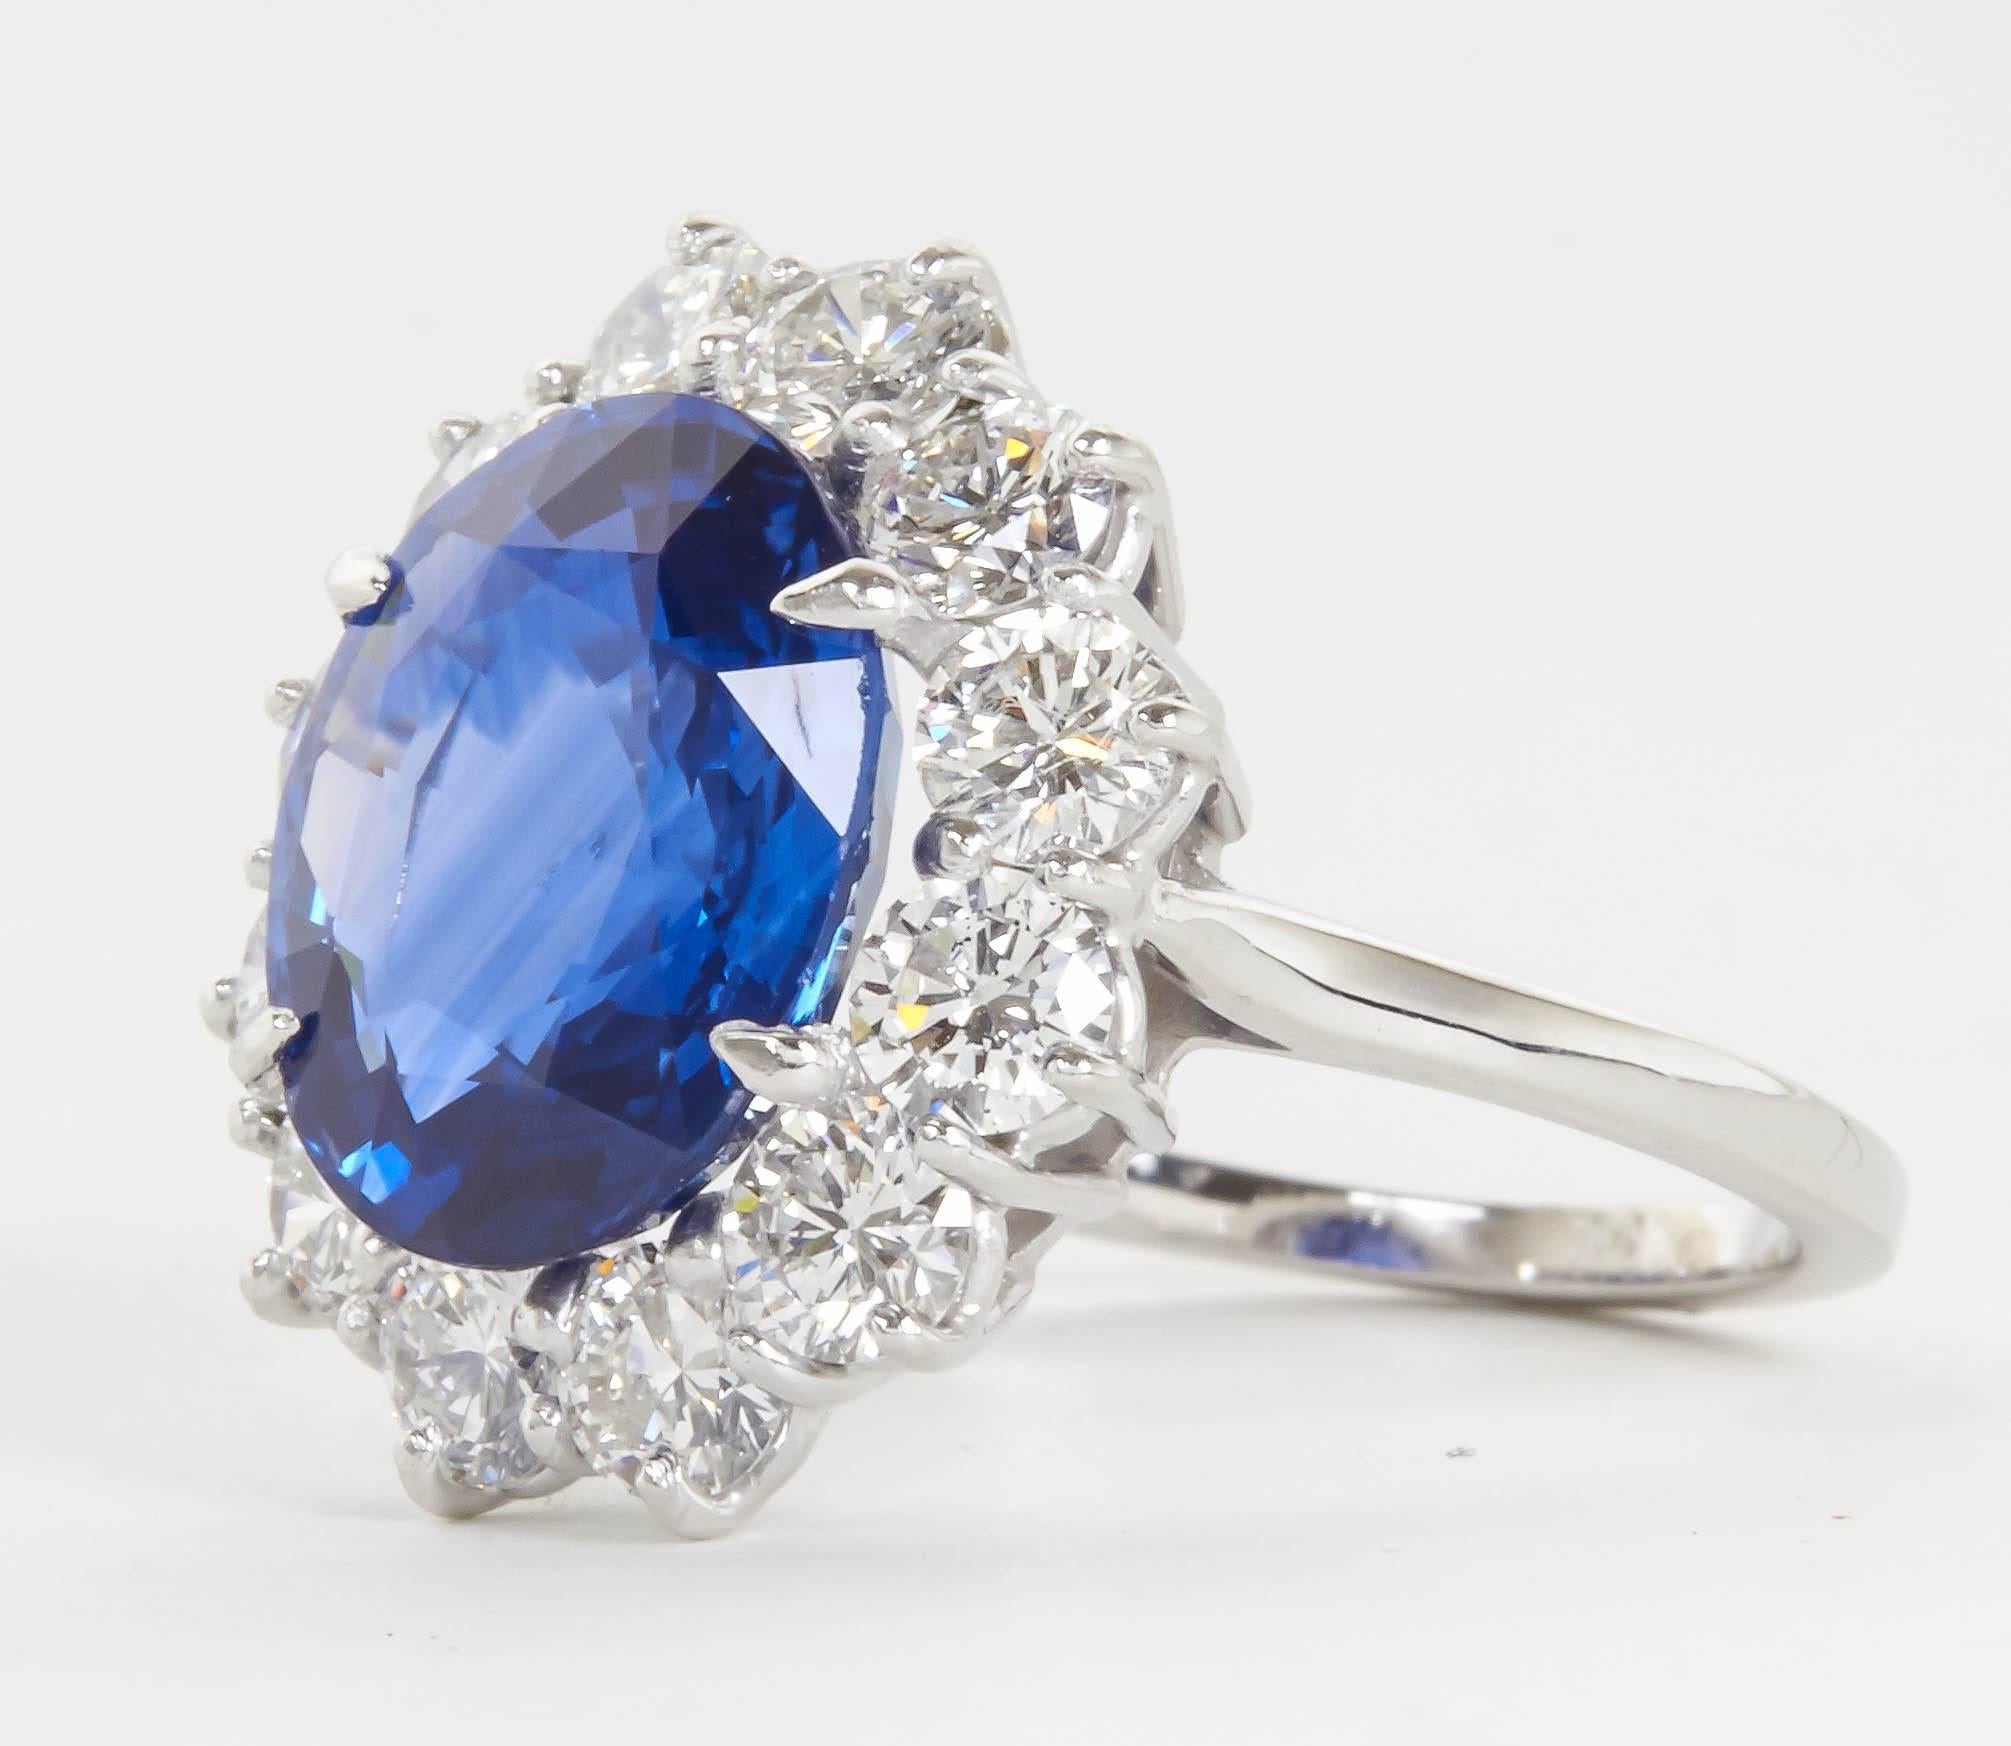 Oval Cut Stunning 6 Carat GIA Certified Sapphire Diamond Platinum Ring For Sale